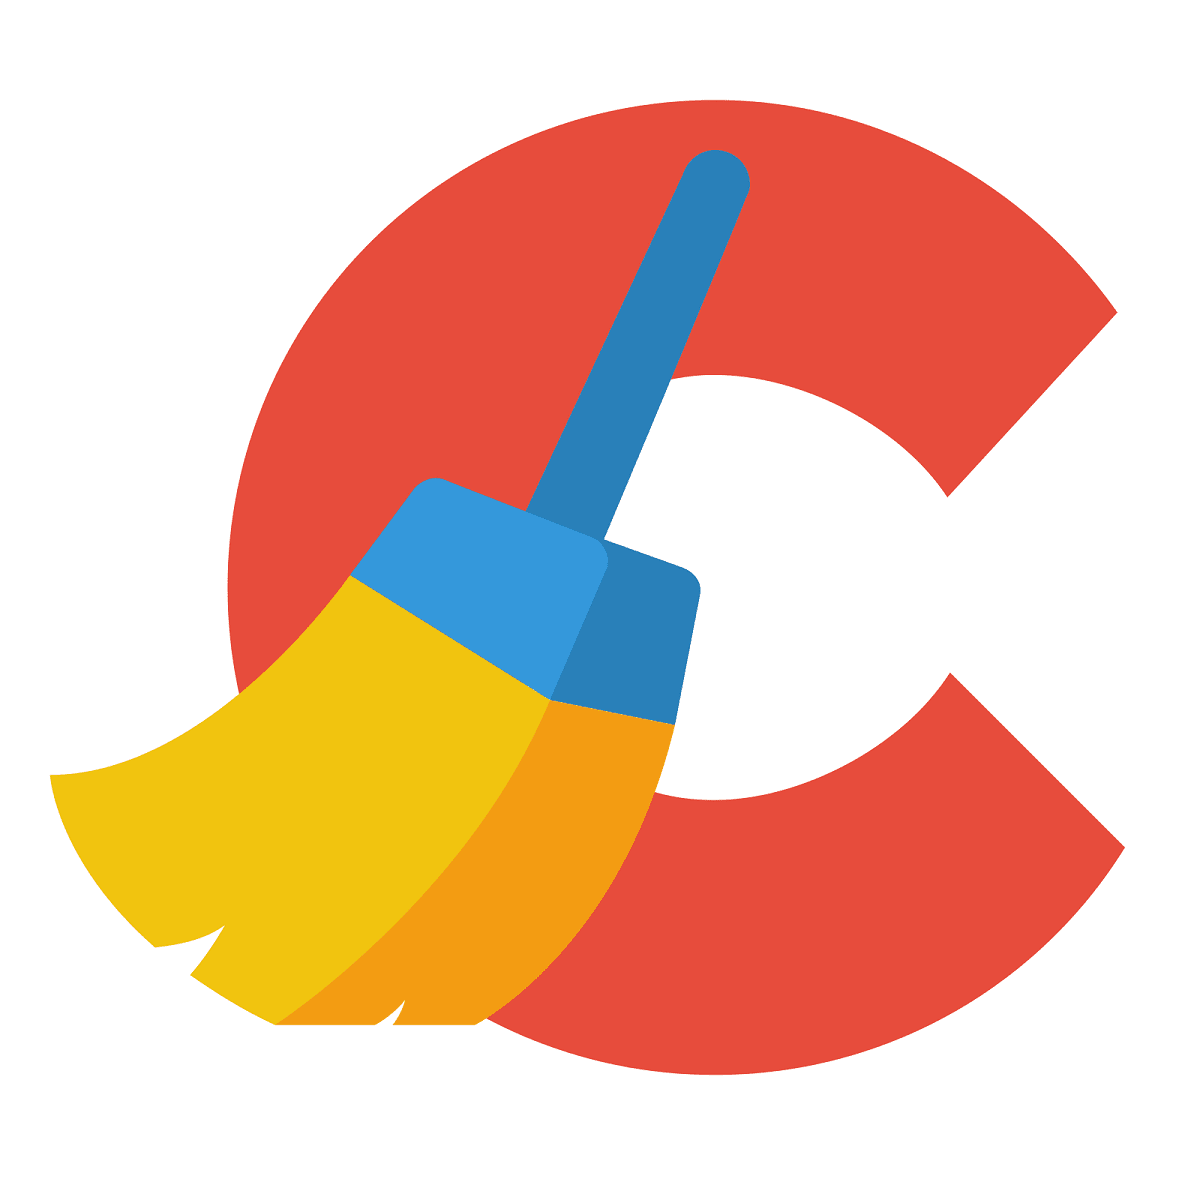 ccleaner free download for windows 10 crack